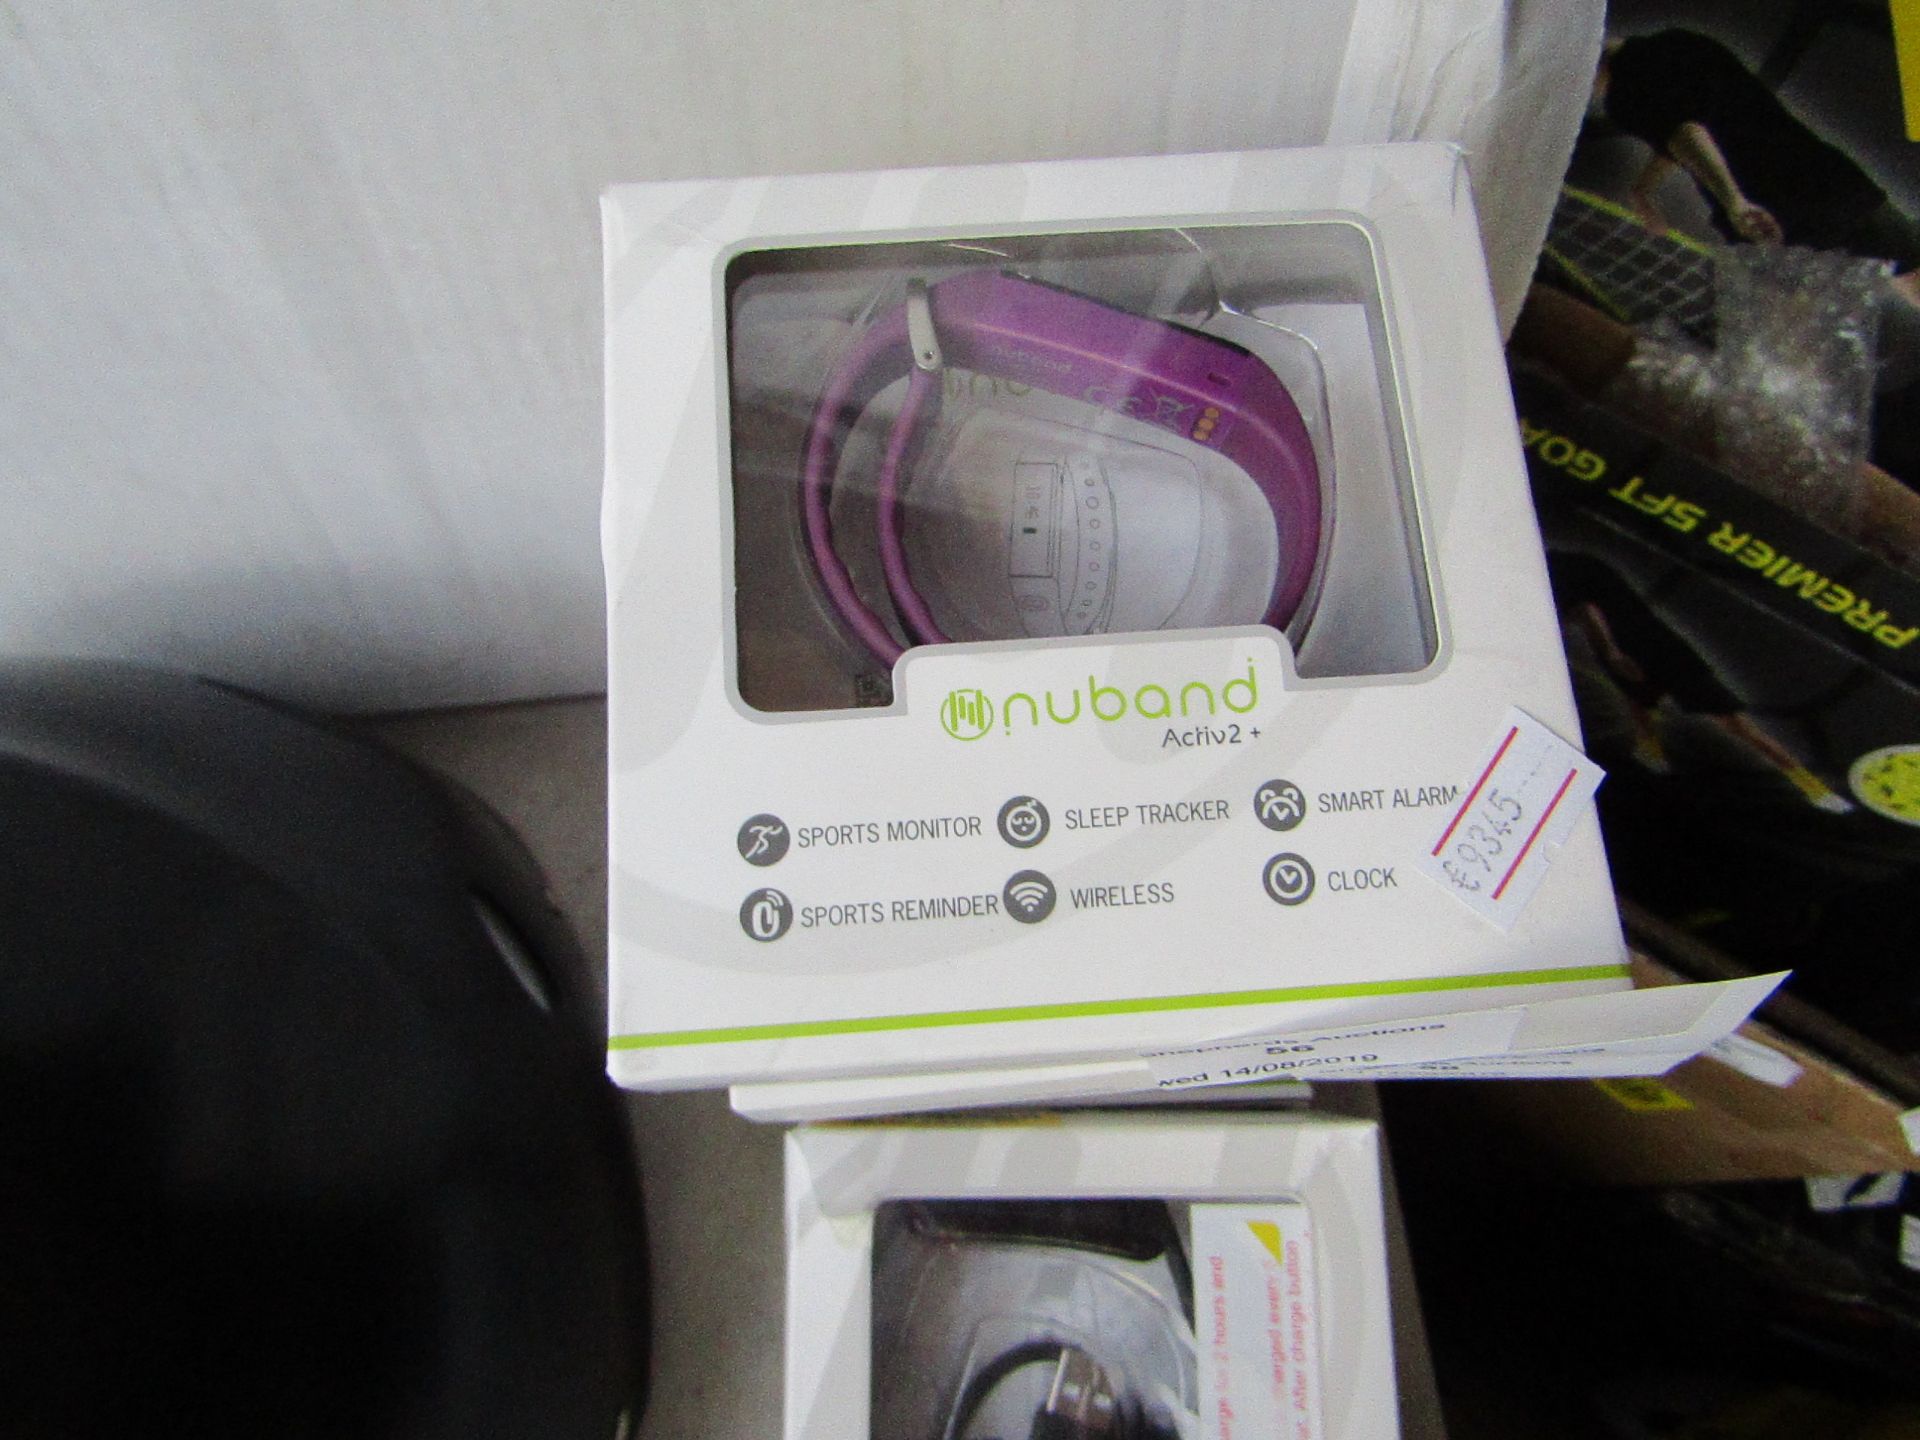 Nuband Activ2 + sports fitness tracker, untested and boxed.